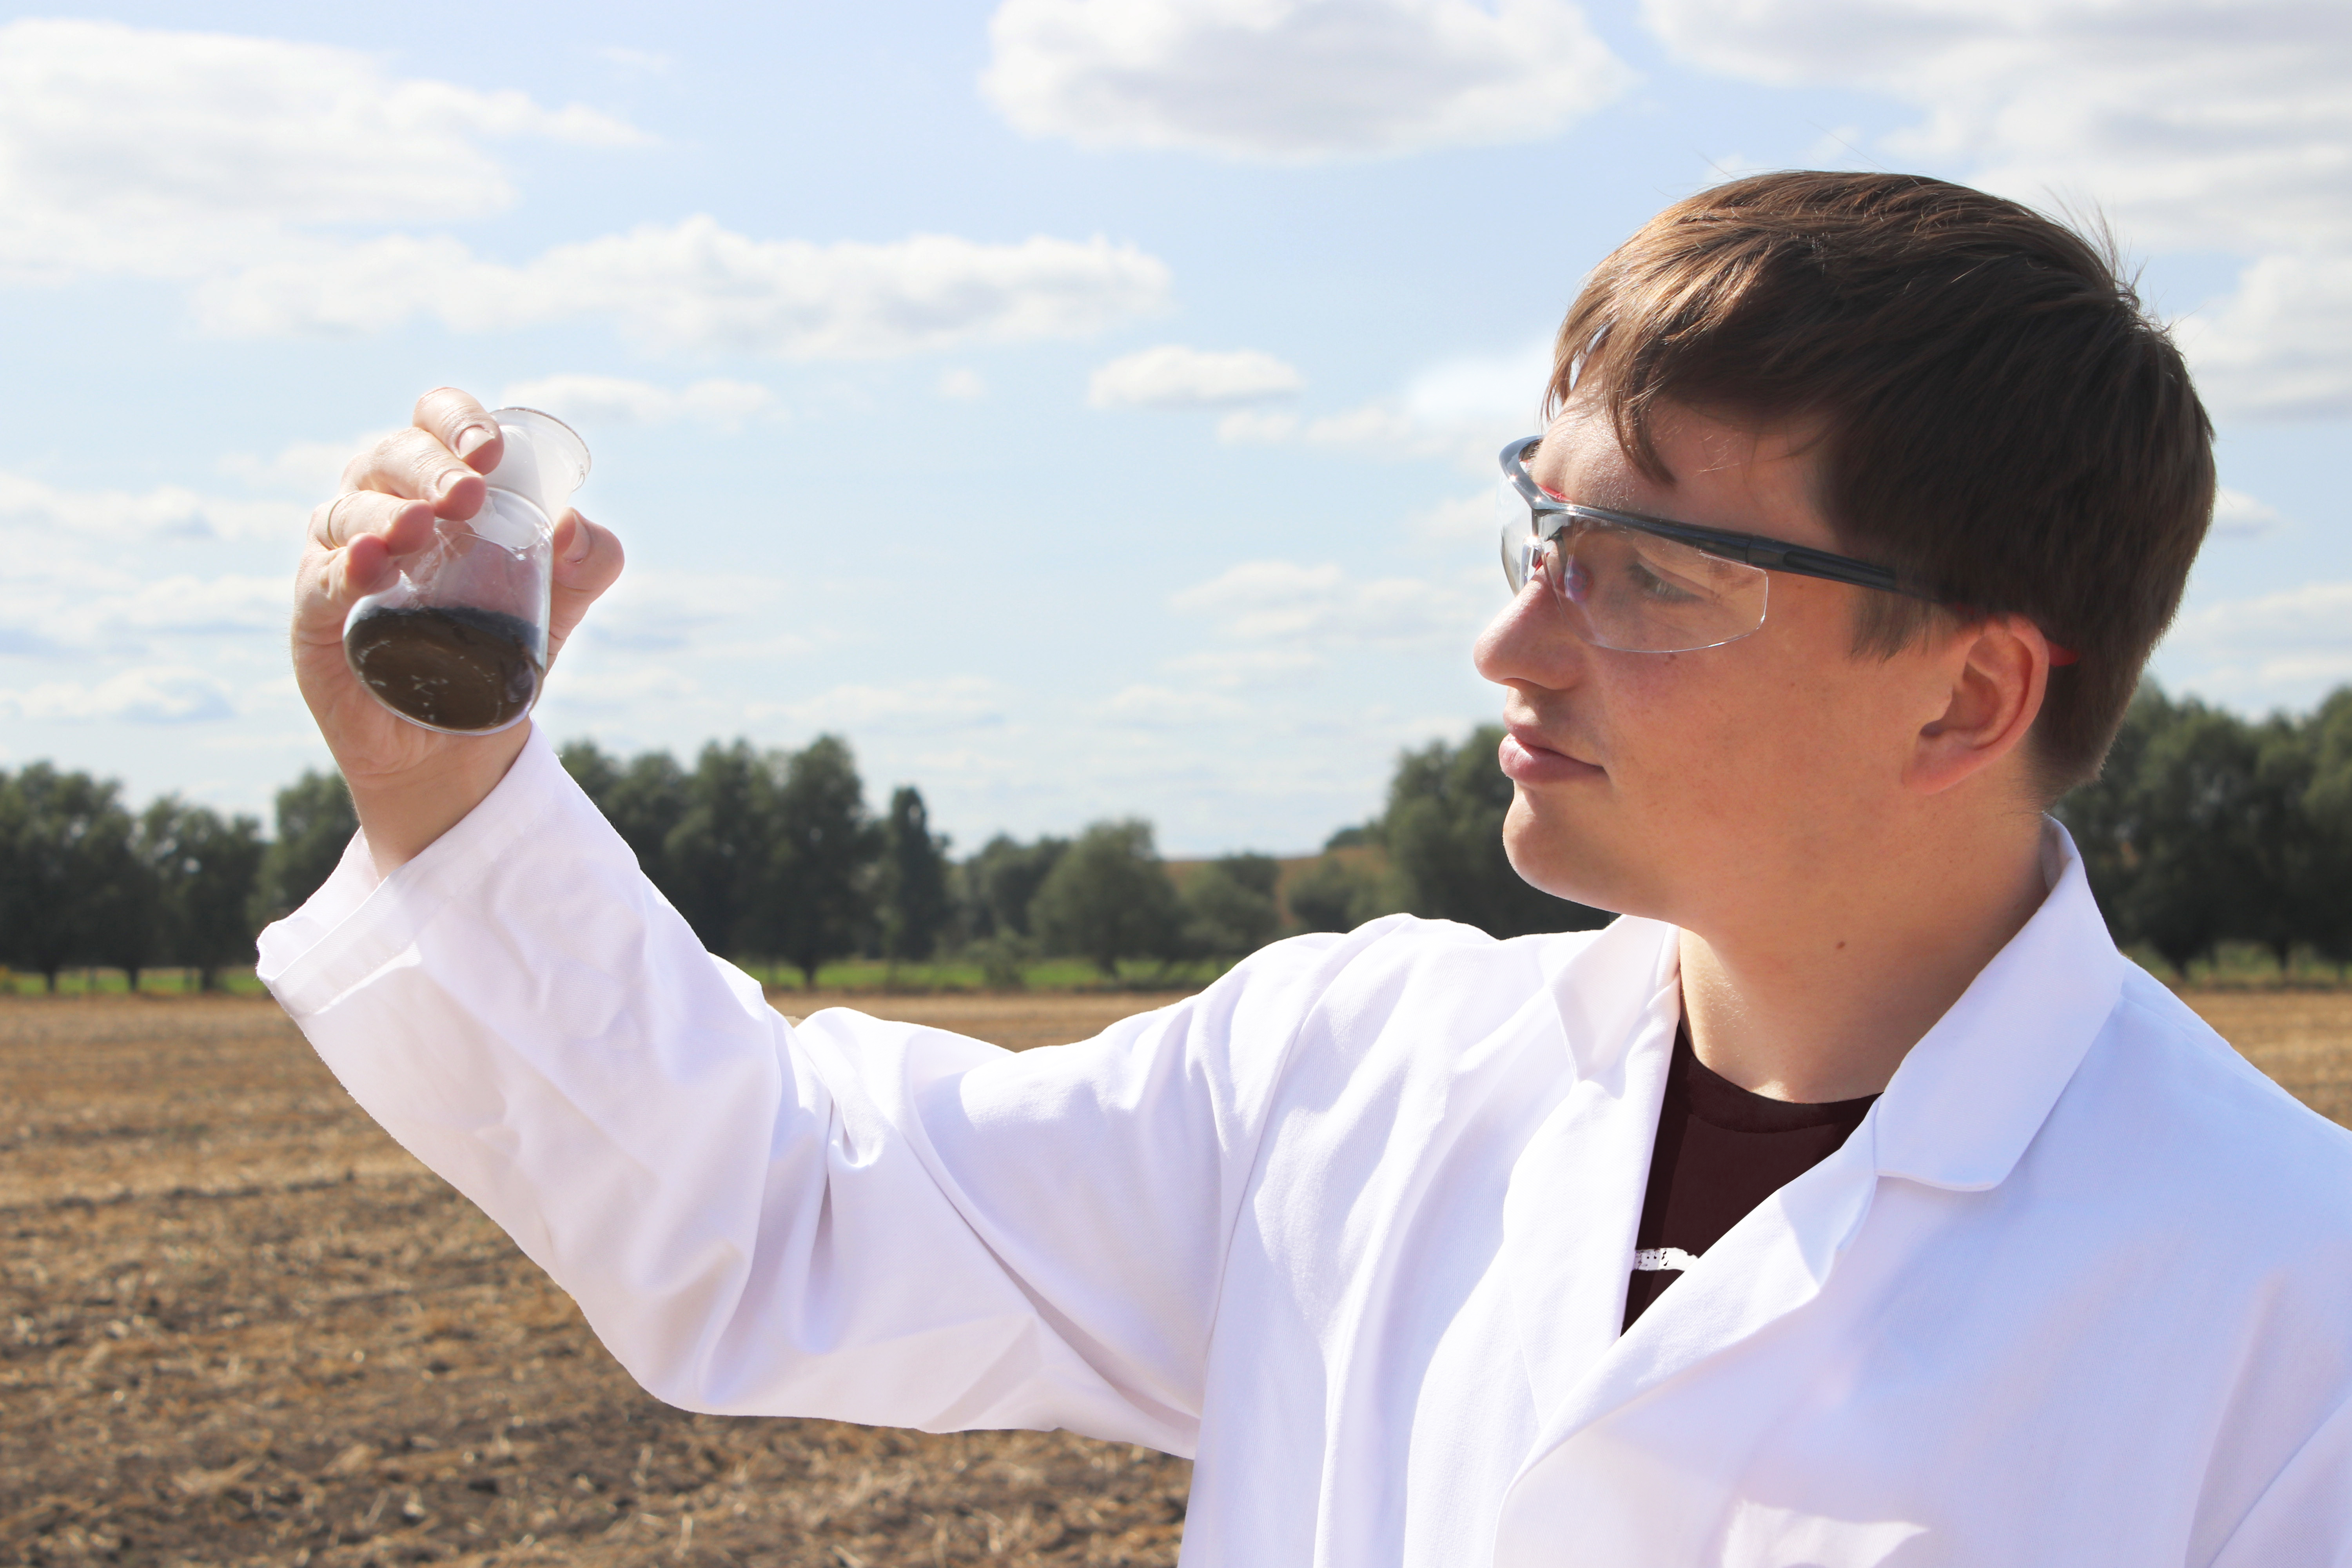 A scientist takes a soil sample for further investigation.